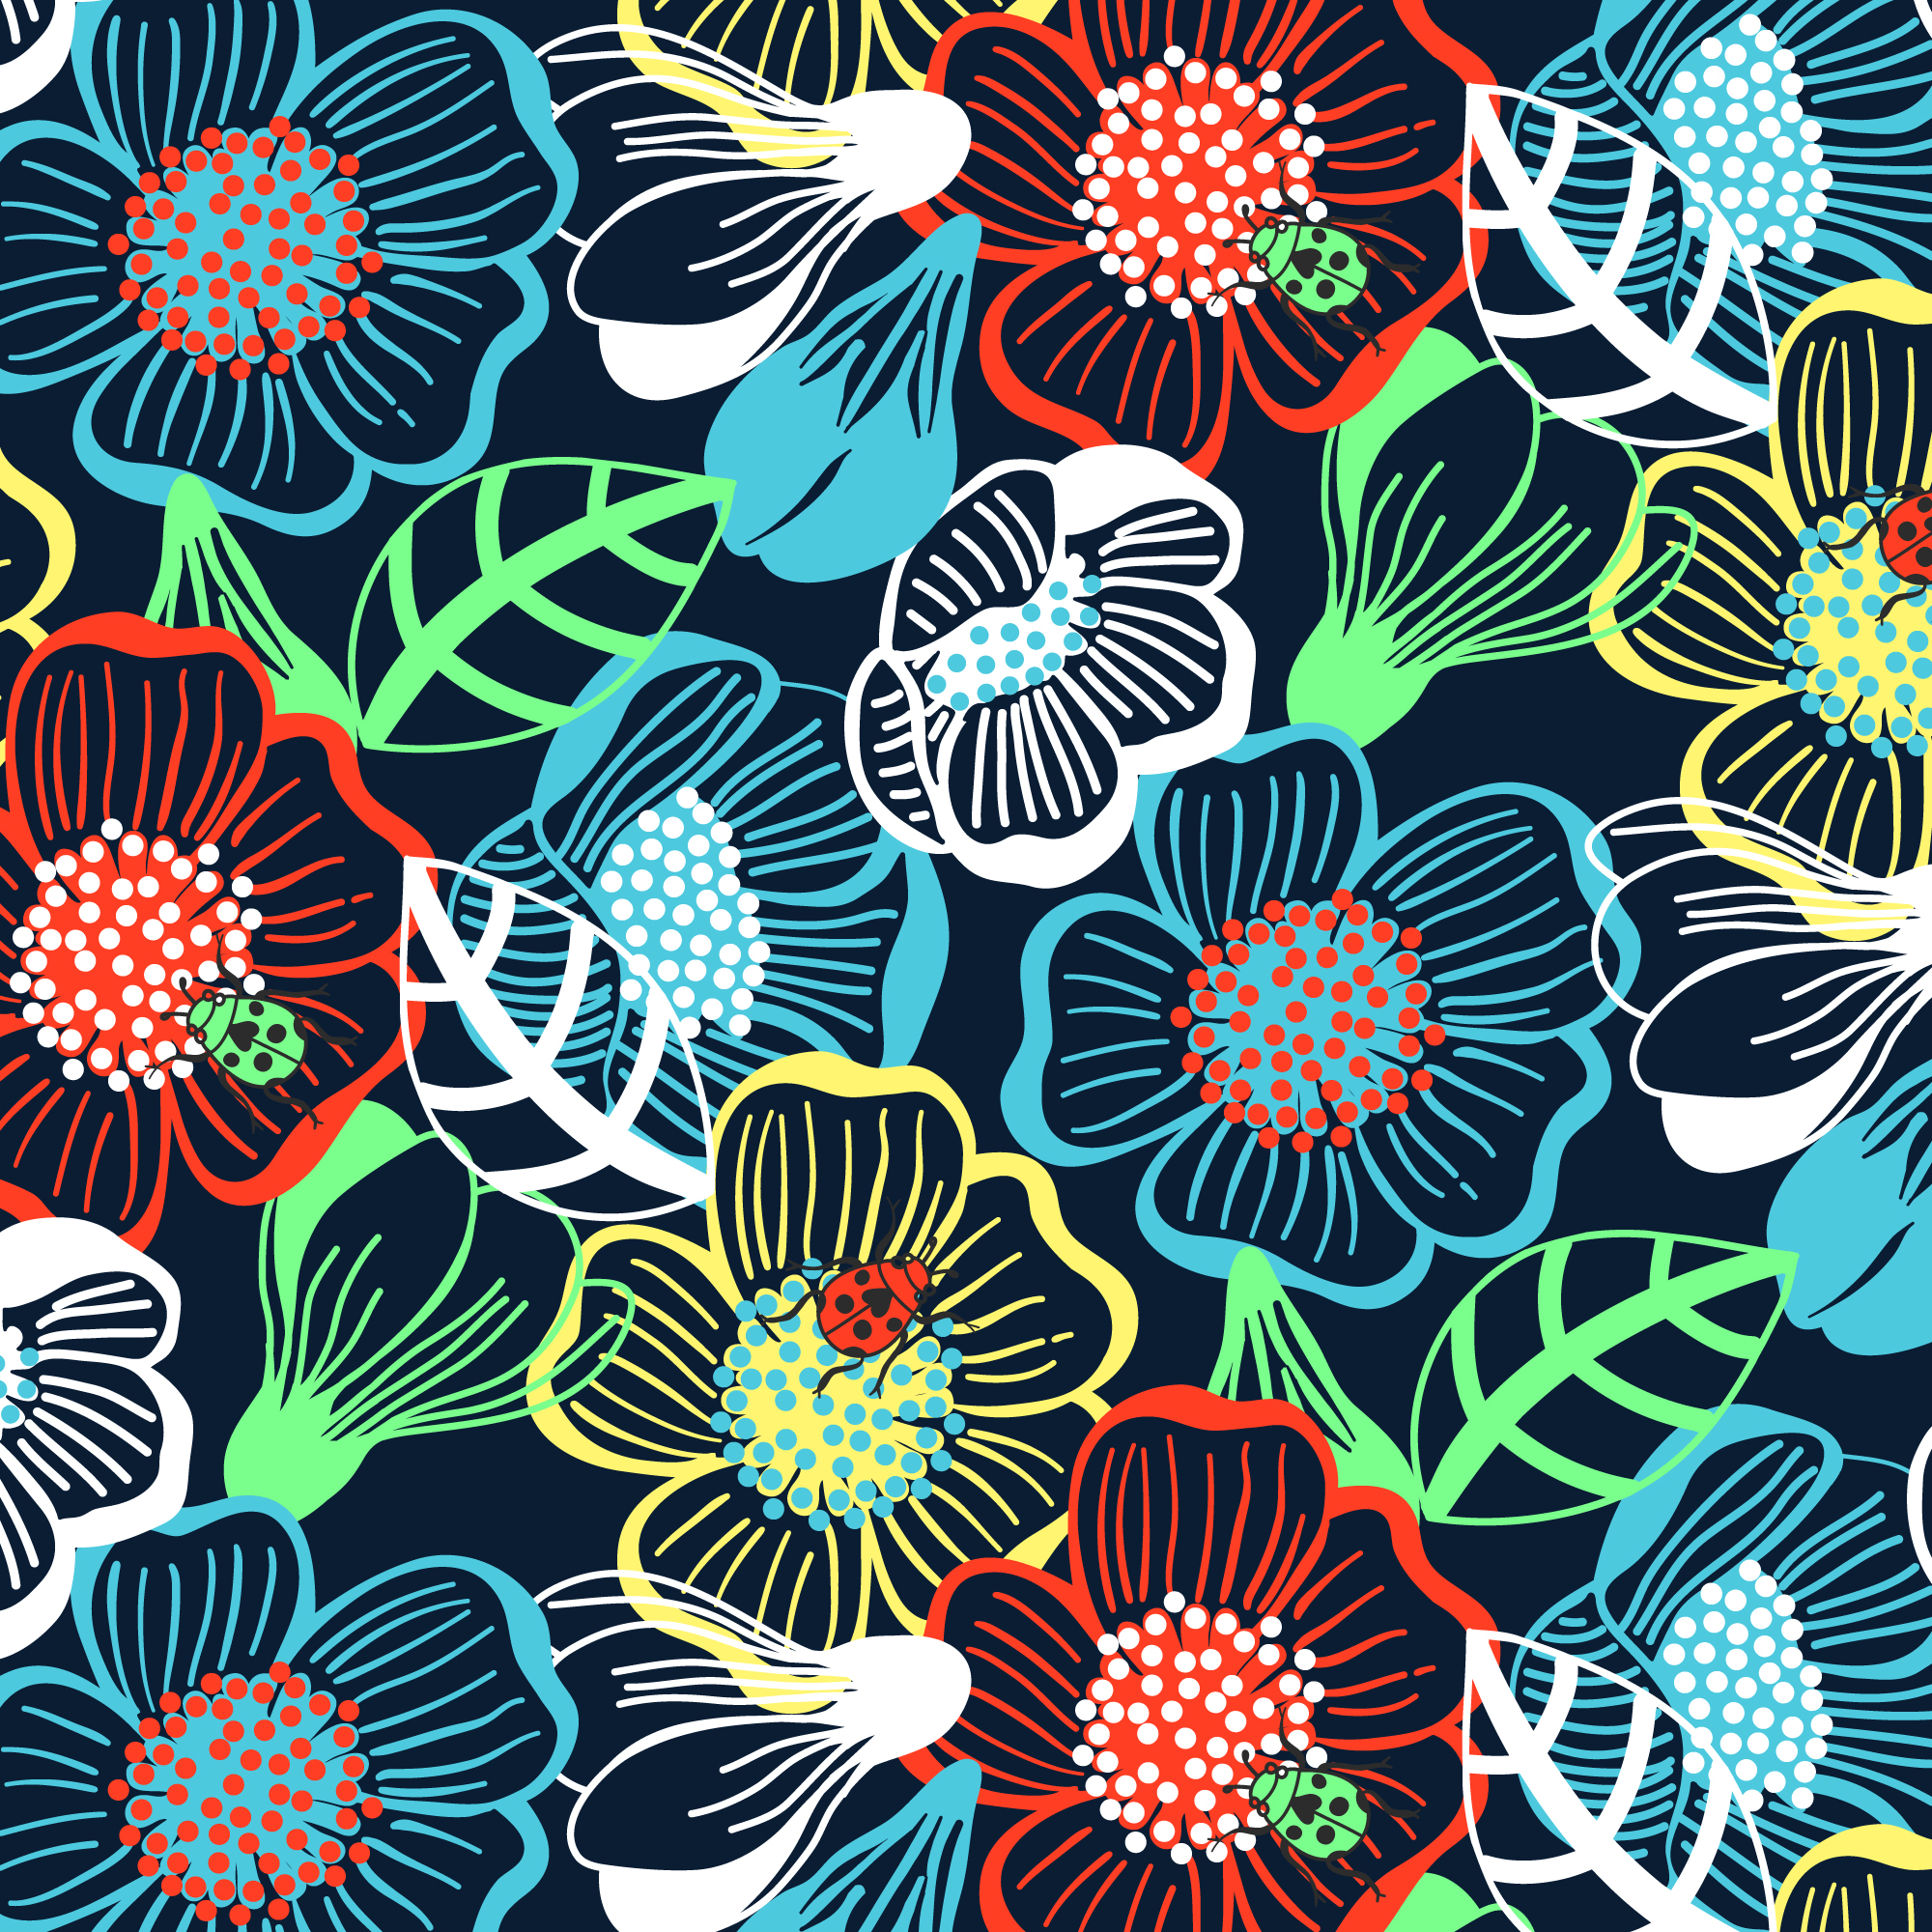 https://static.vecteezy.com/system/resources/previews/000/674/347/original/vector-hand-drawn-bold-colorful-large-print-floral-pattern.jpg